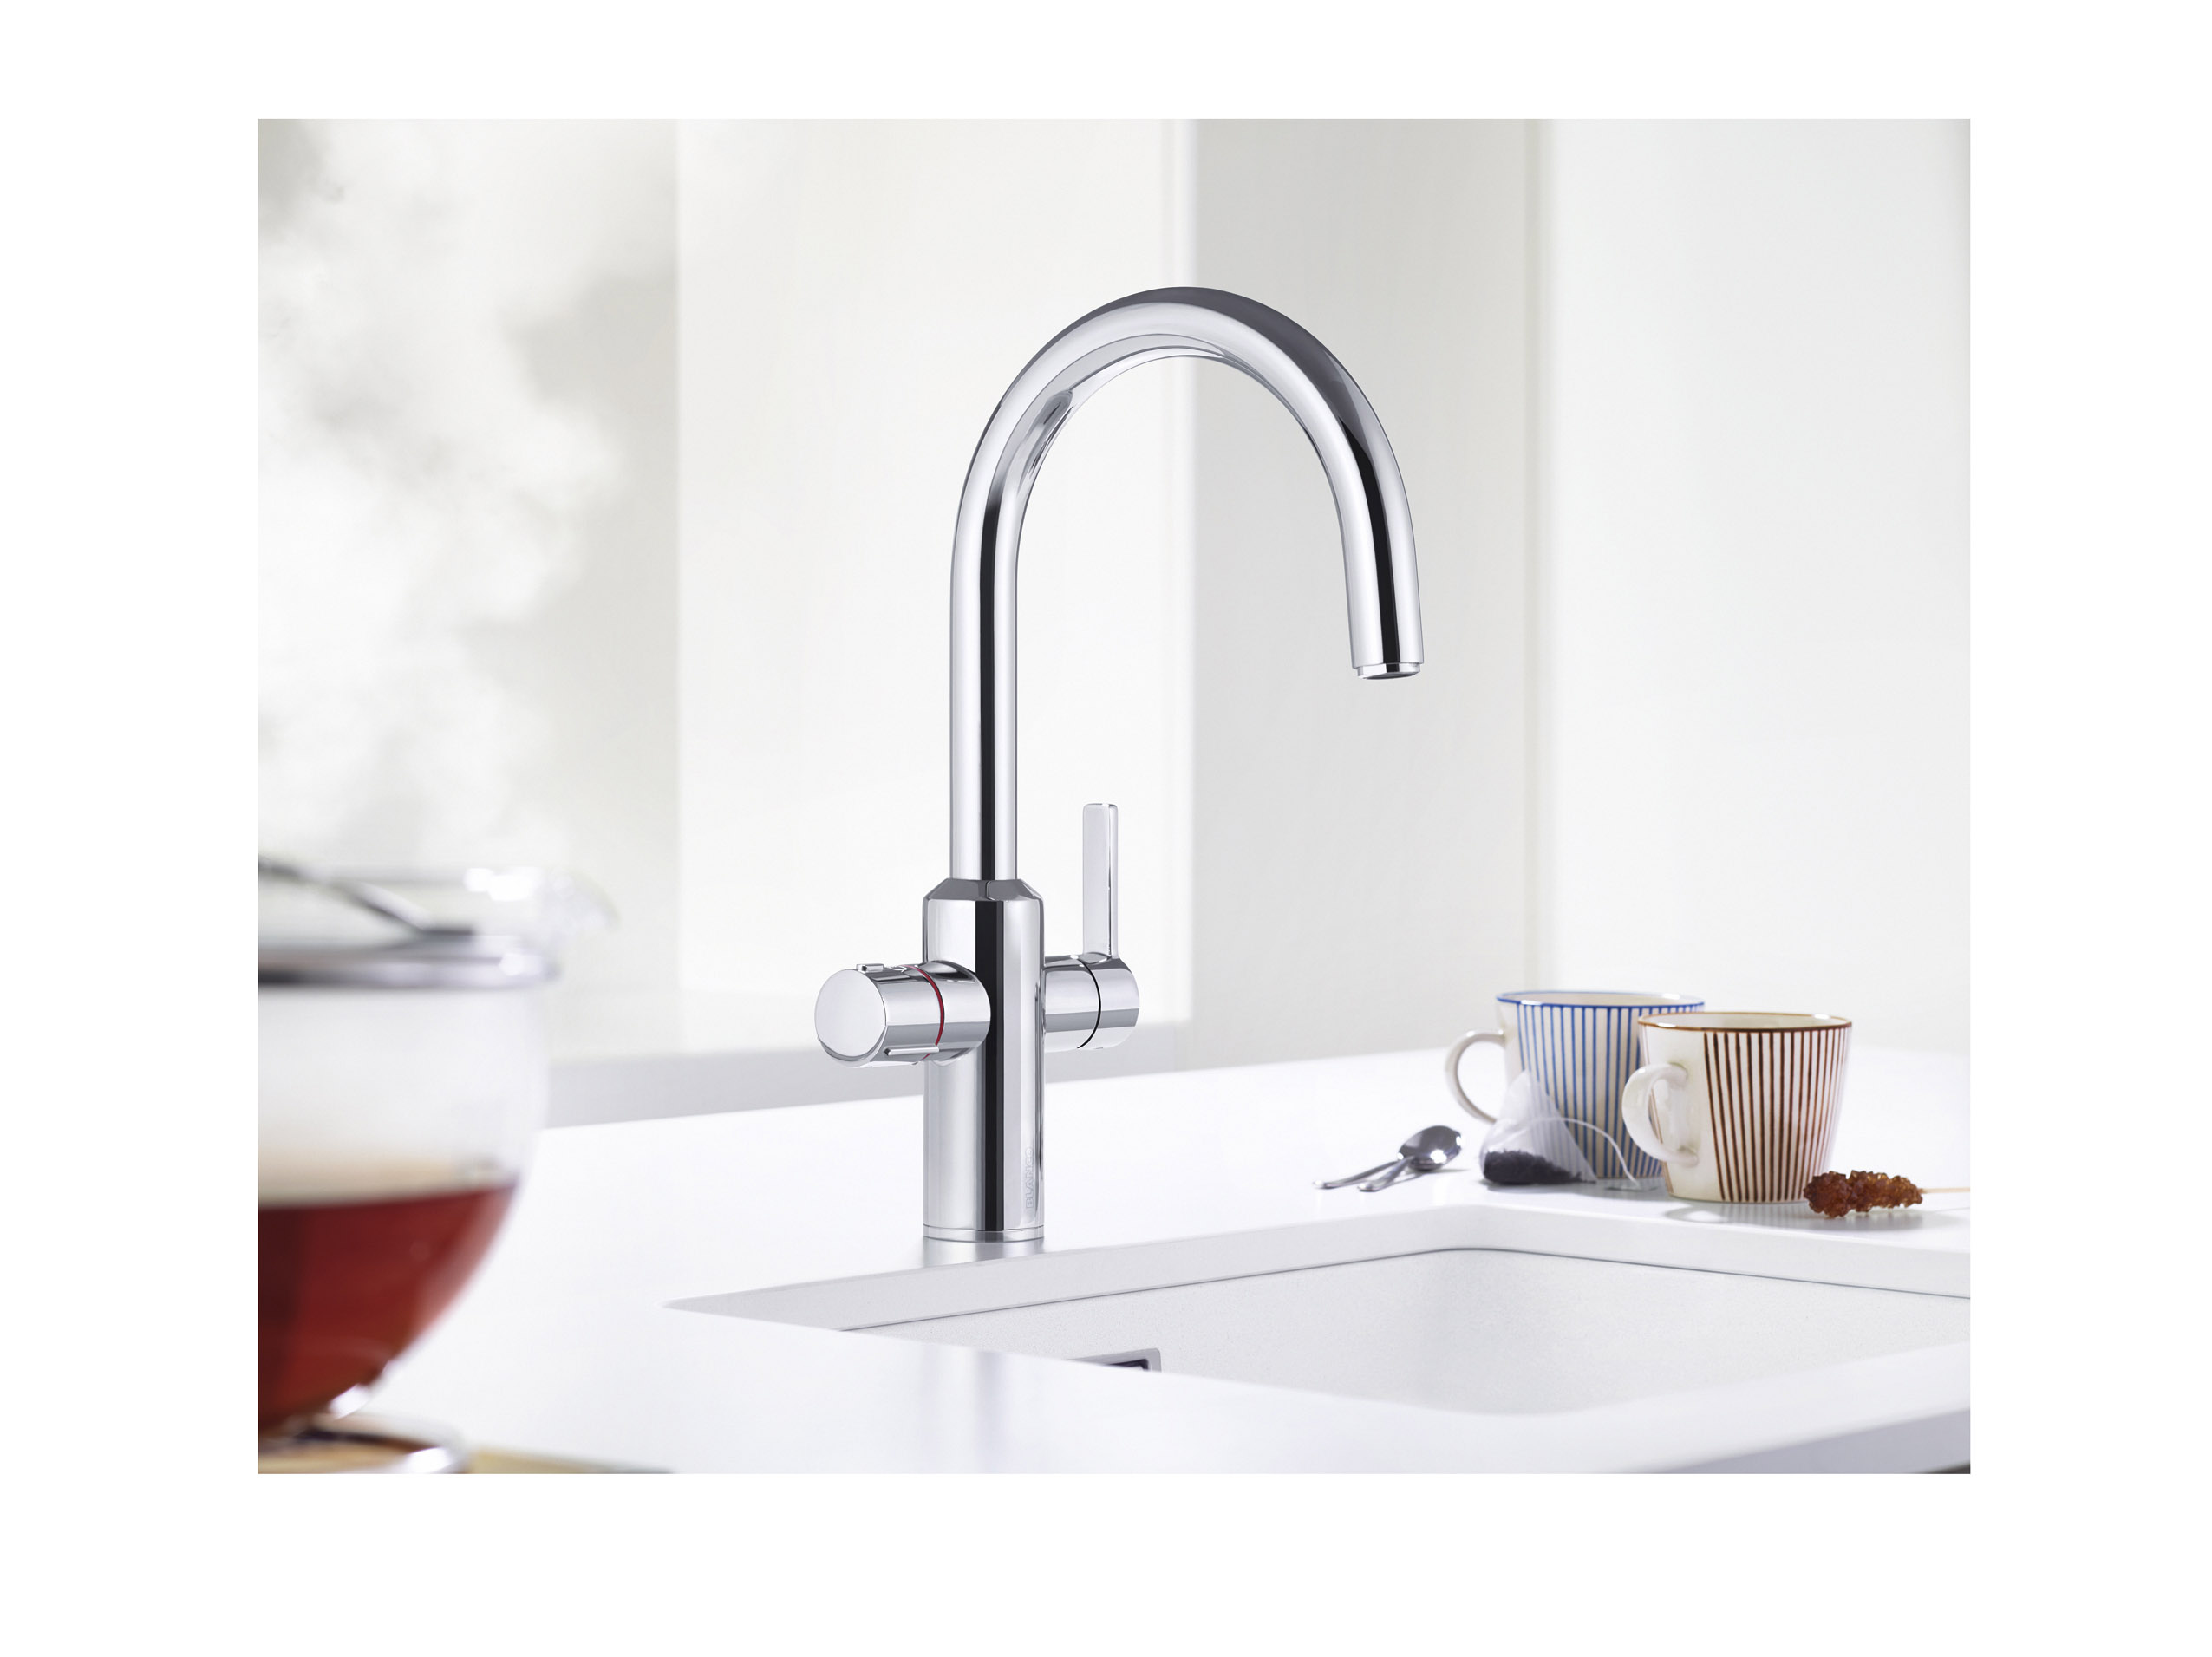 The convenient 3-in-1 system dispenses hot water at almost 100°C in an instant